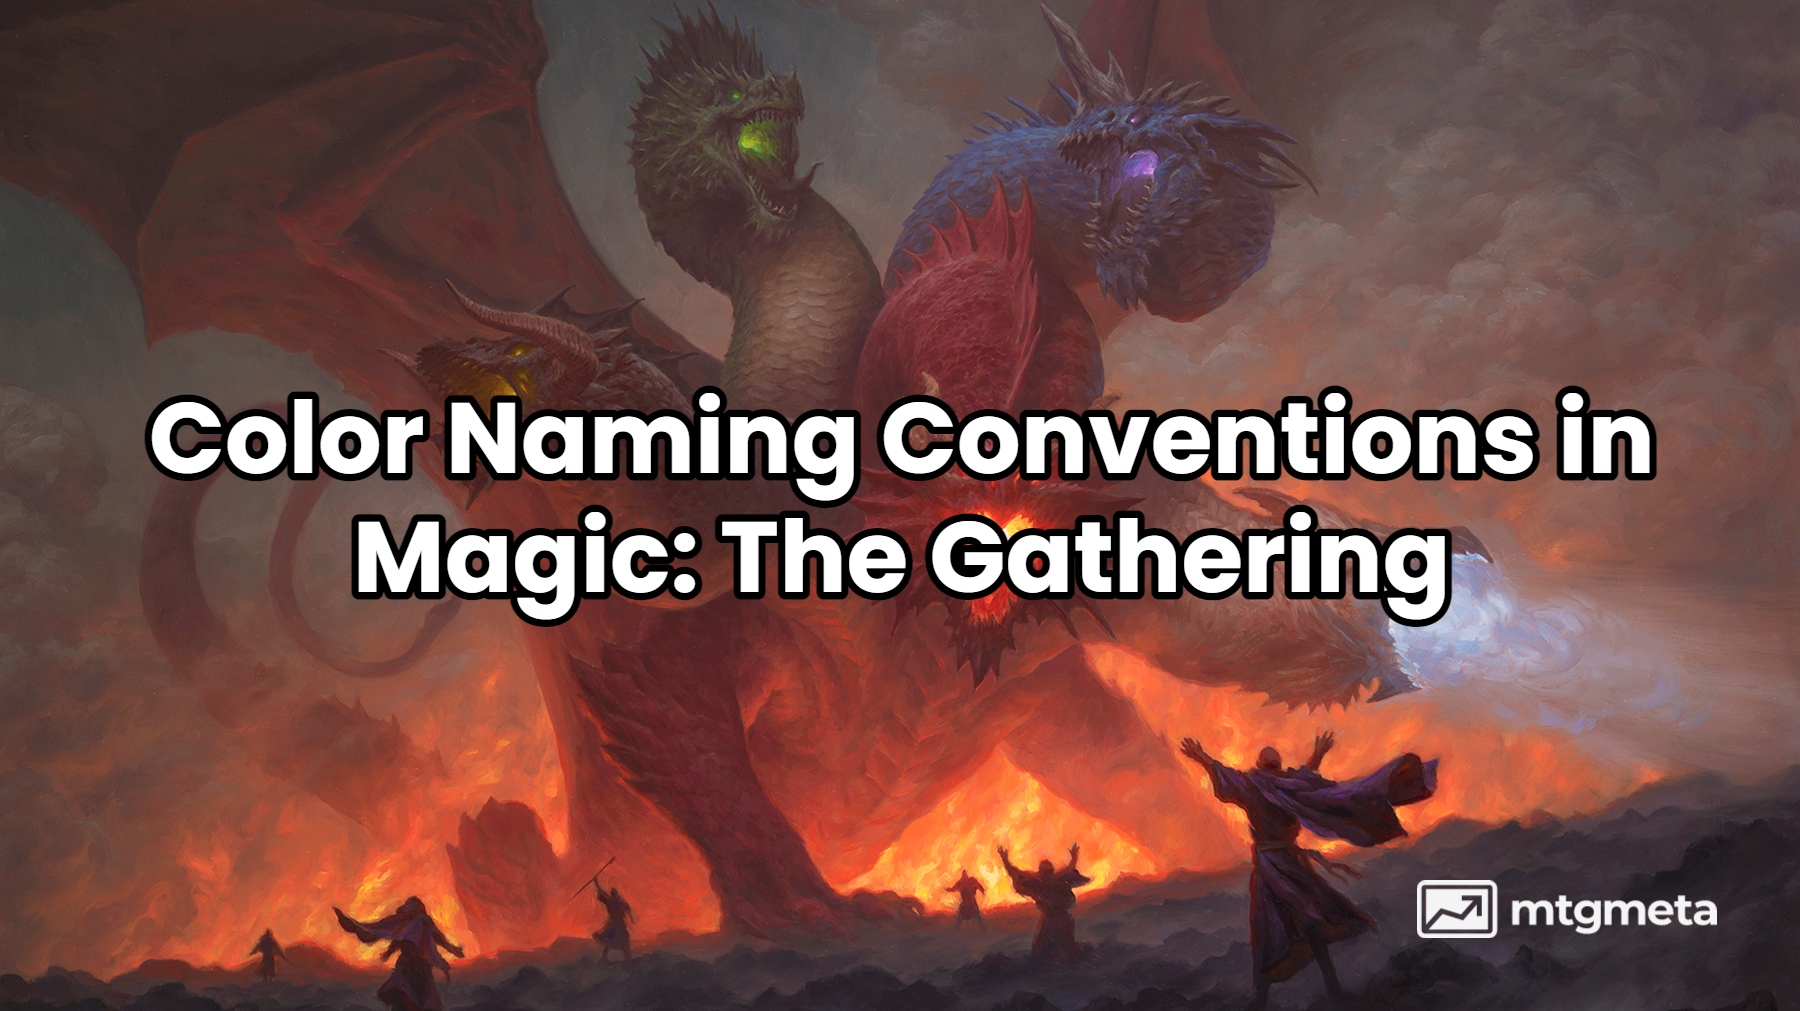 Color Naming Conventions in Magic: The Gathering